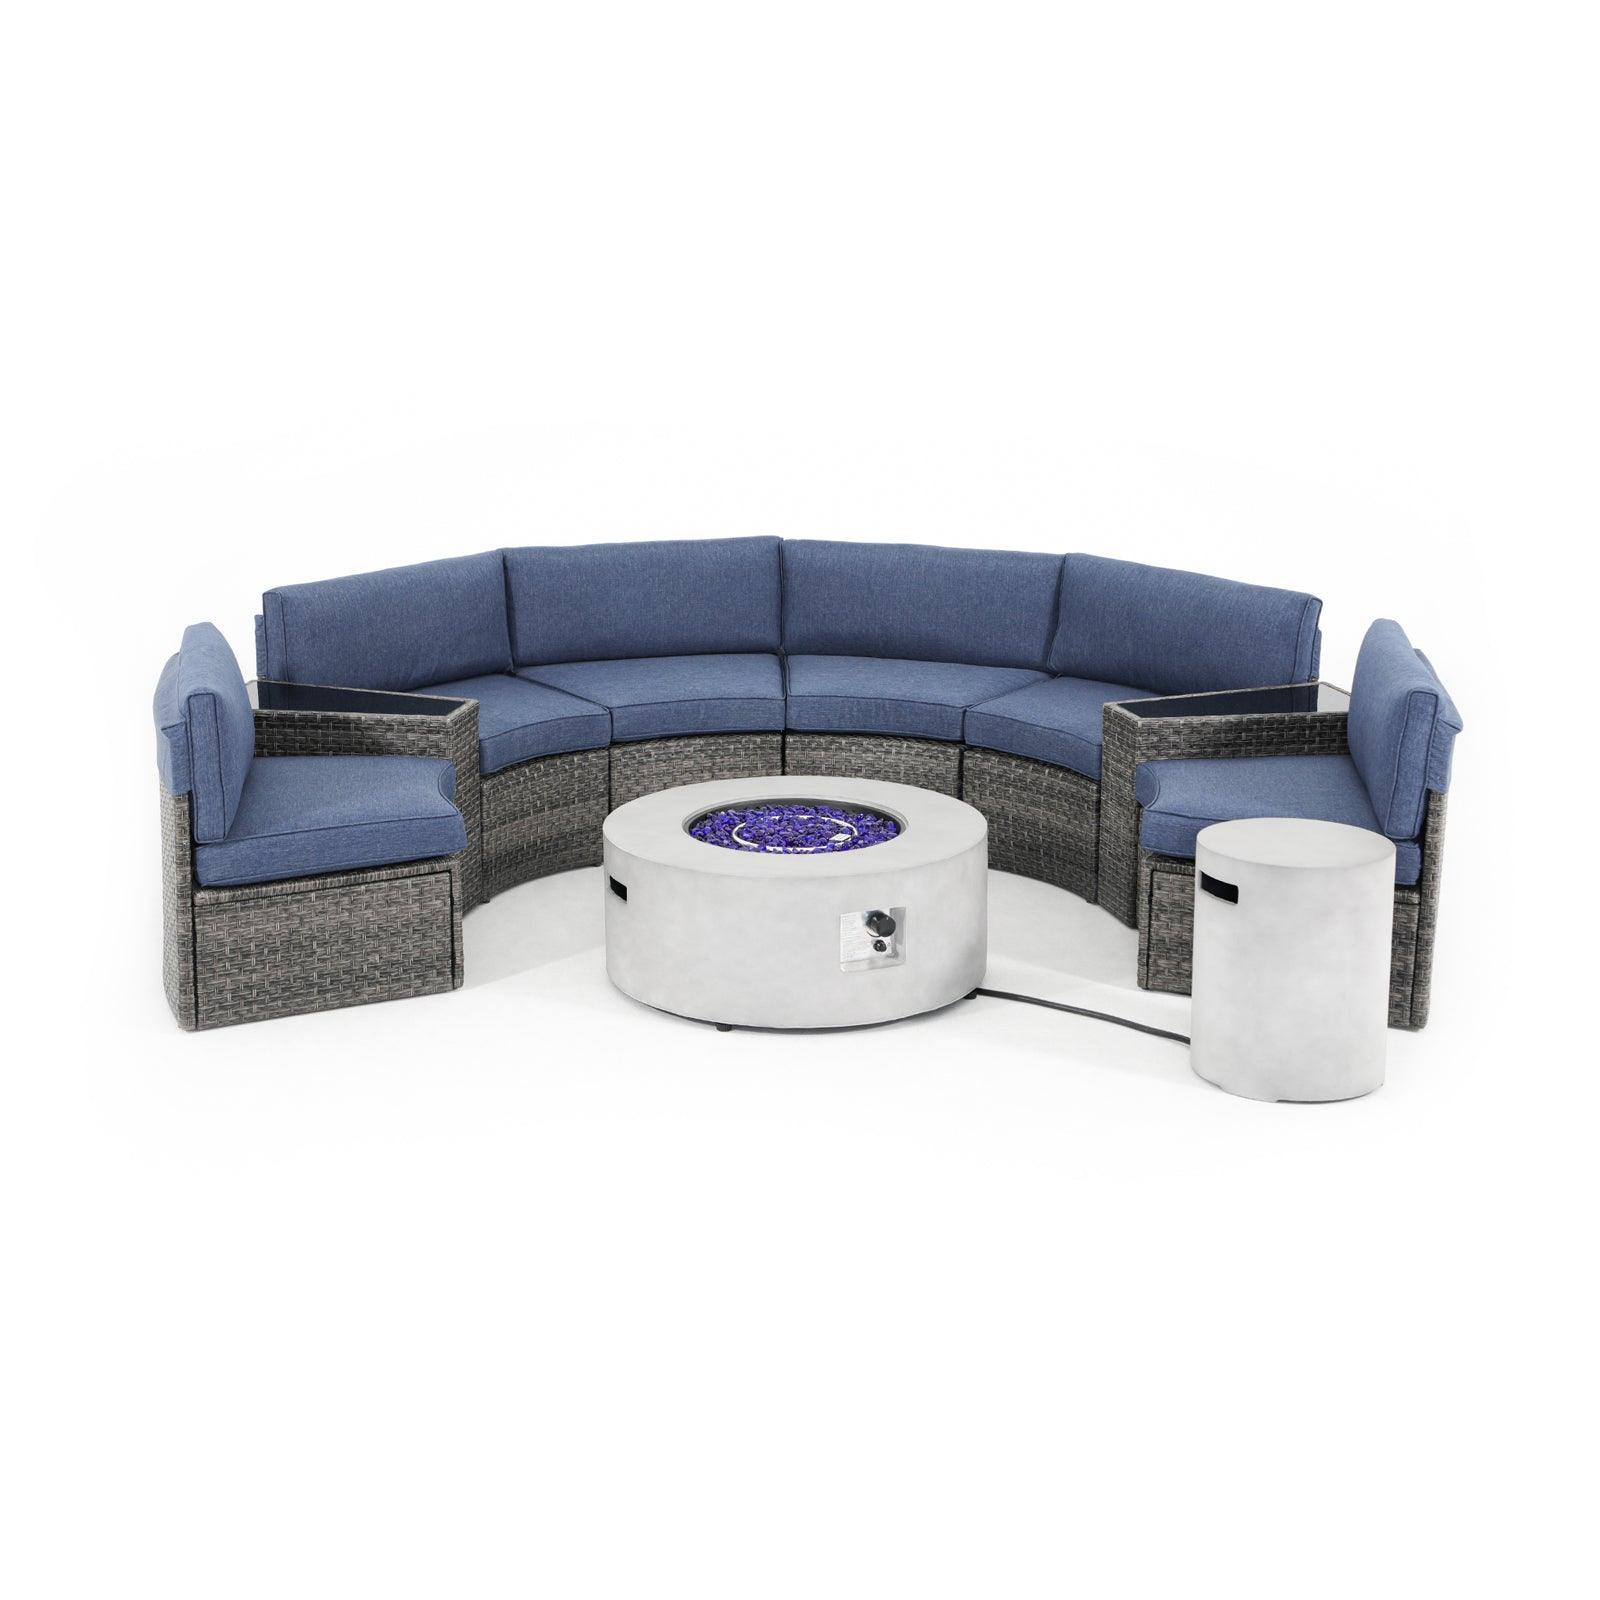 Boboli 6-seater Grey Wicker Curved Sectional sofas with navy blue cushions +2 side tables + 1 grey Propane Fire Pit with tank holder, front view- Jardina Furniture#color_Navy Blue #piece_9-pc.